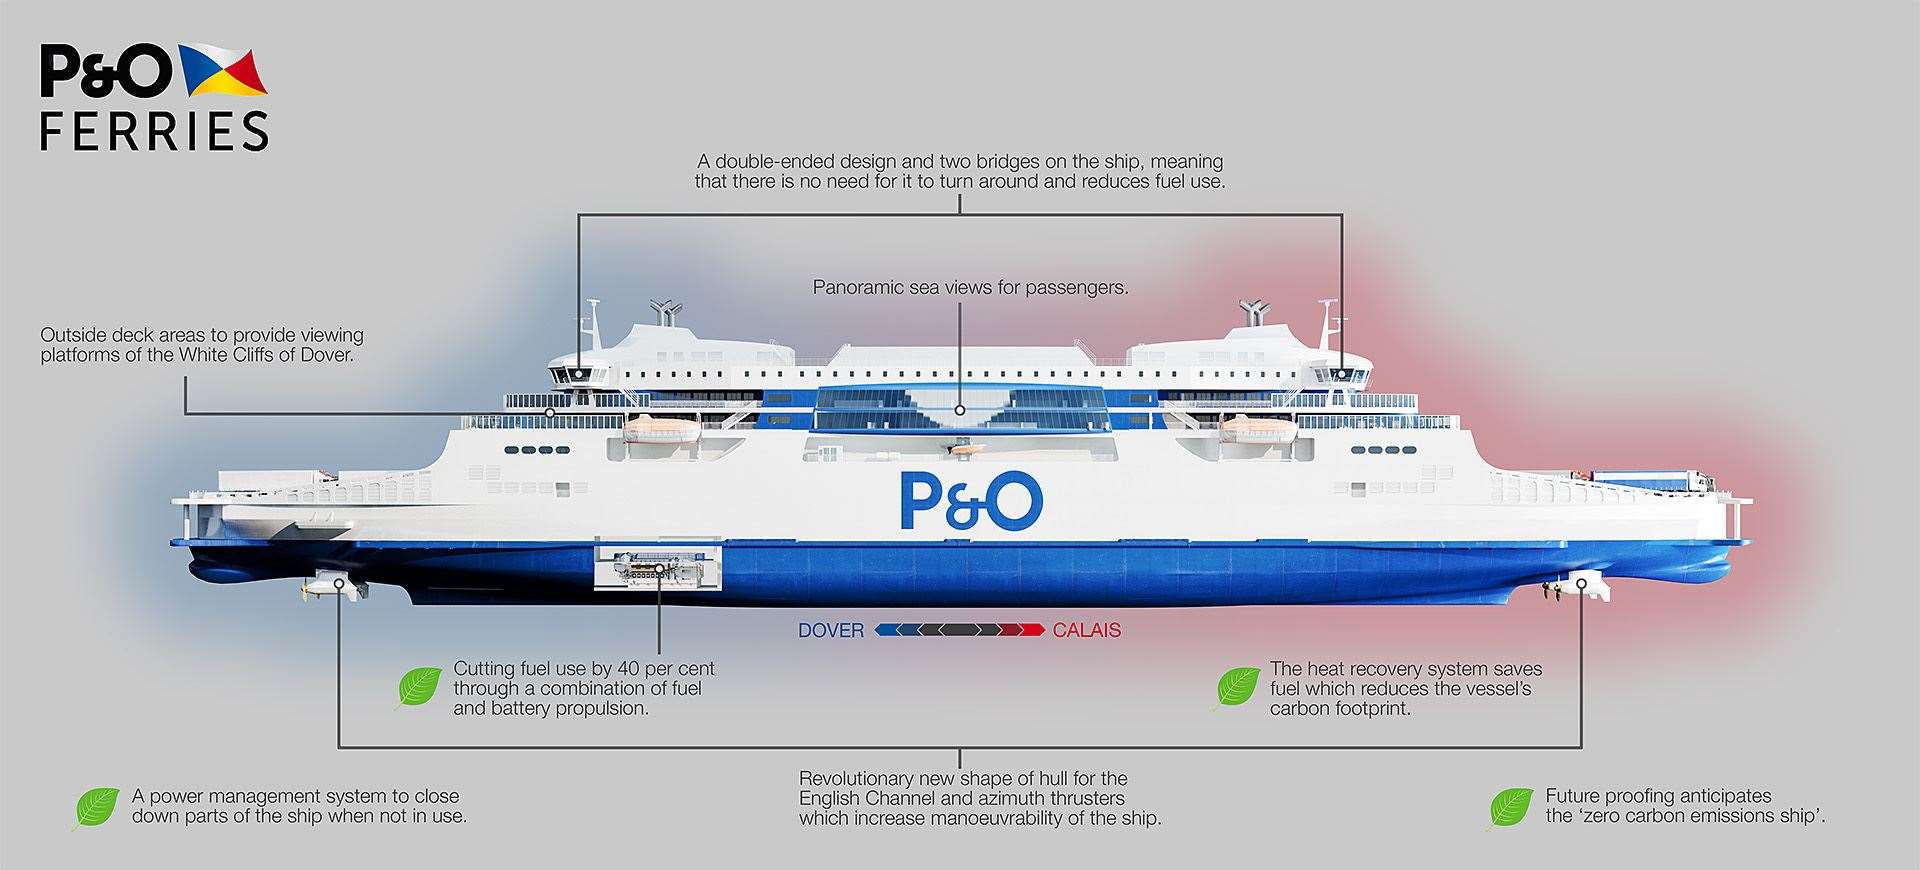 One of the new ships in detail. Picture: P&O Ferries